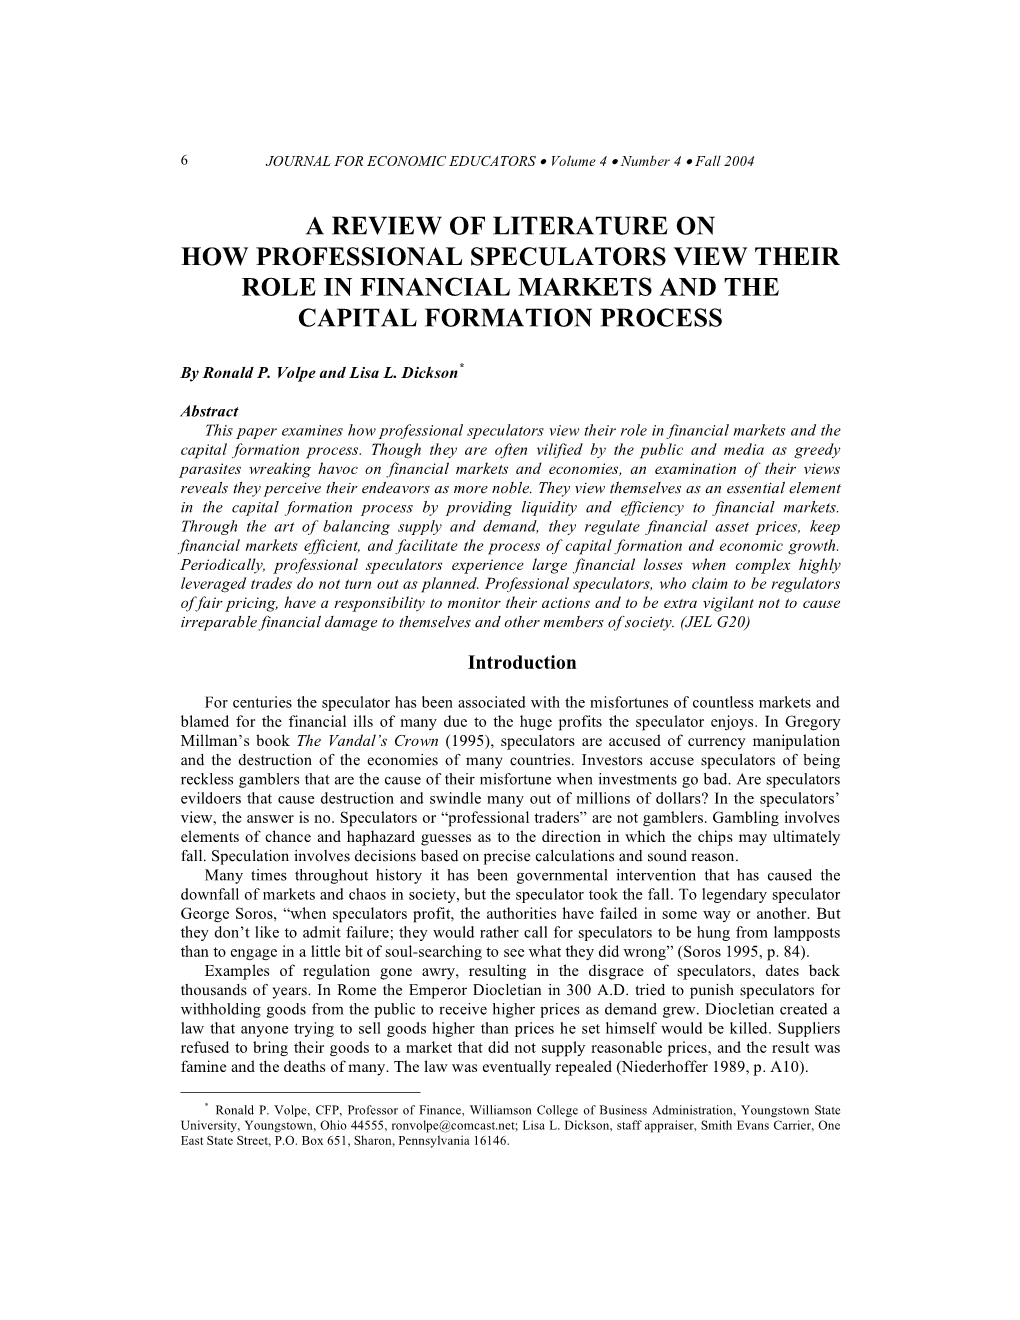 A Review of Literature on How Professional Speculators View Their Role in Financial Markets and the Capital Formation Process